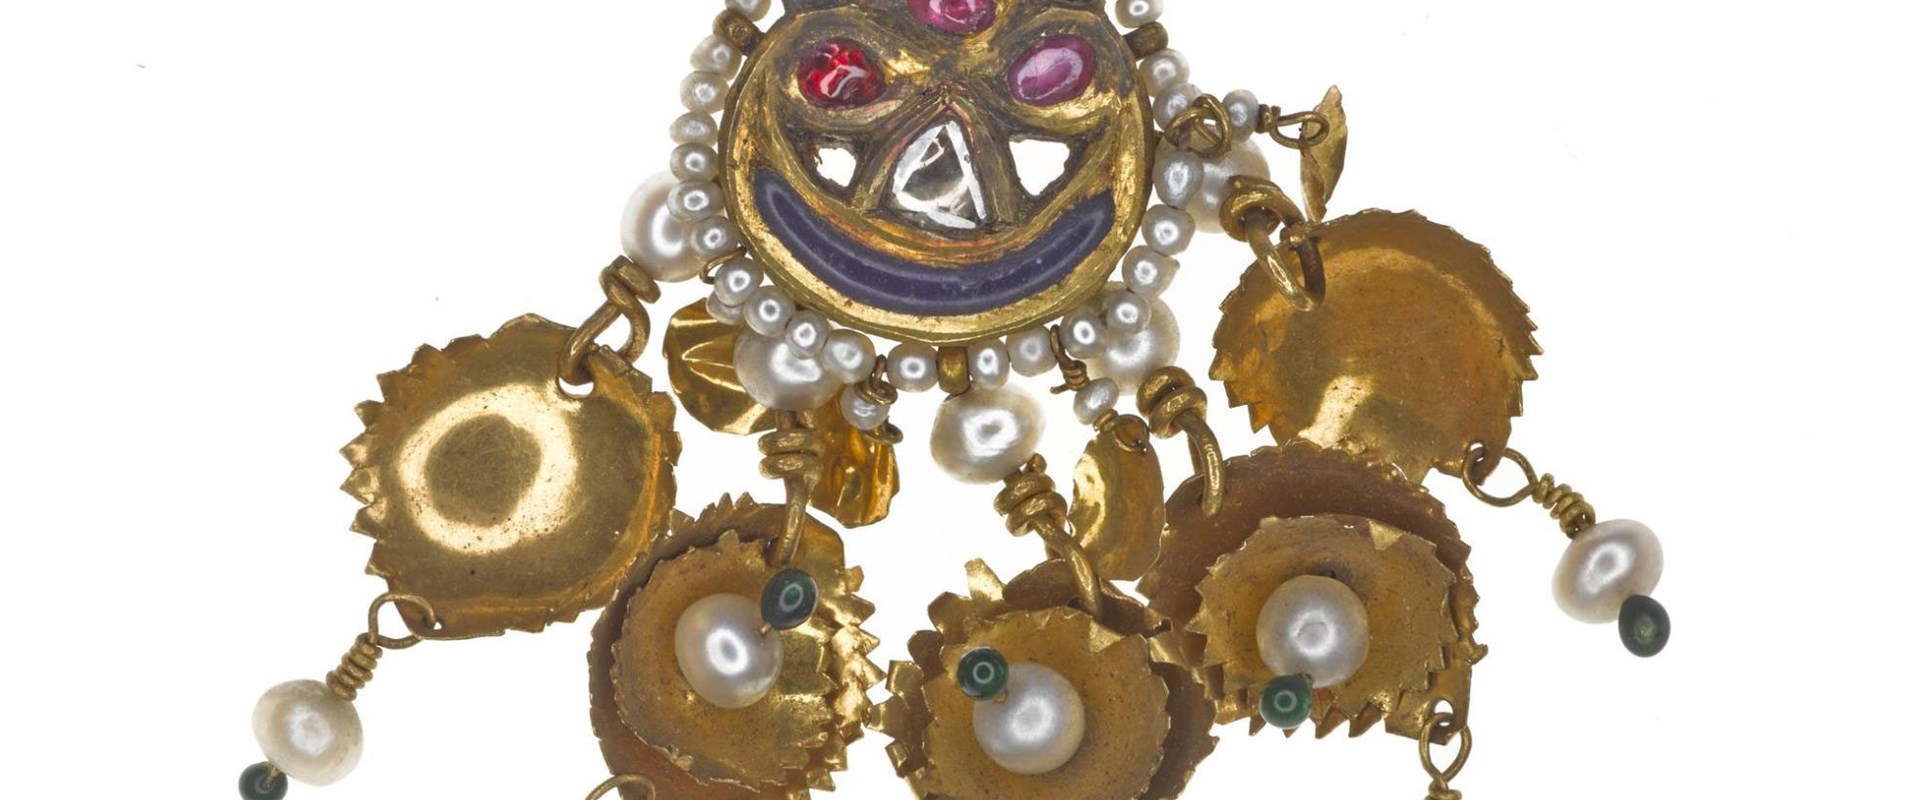 Earring from the collection of Maharajah Duleep Singh